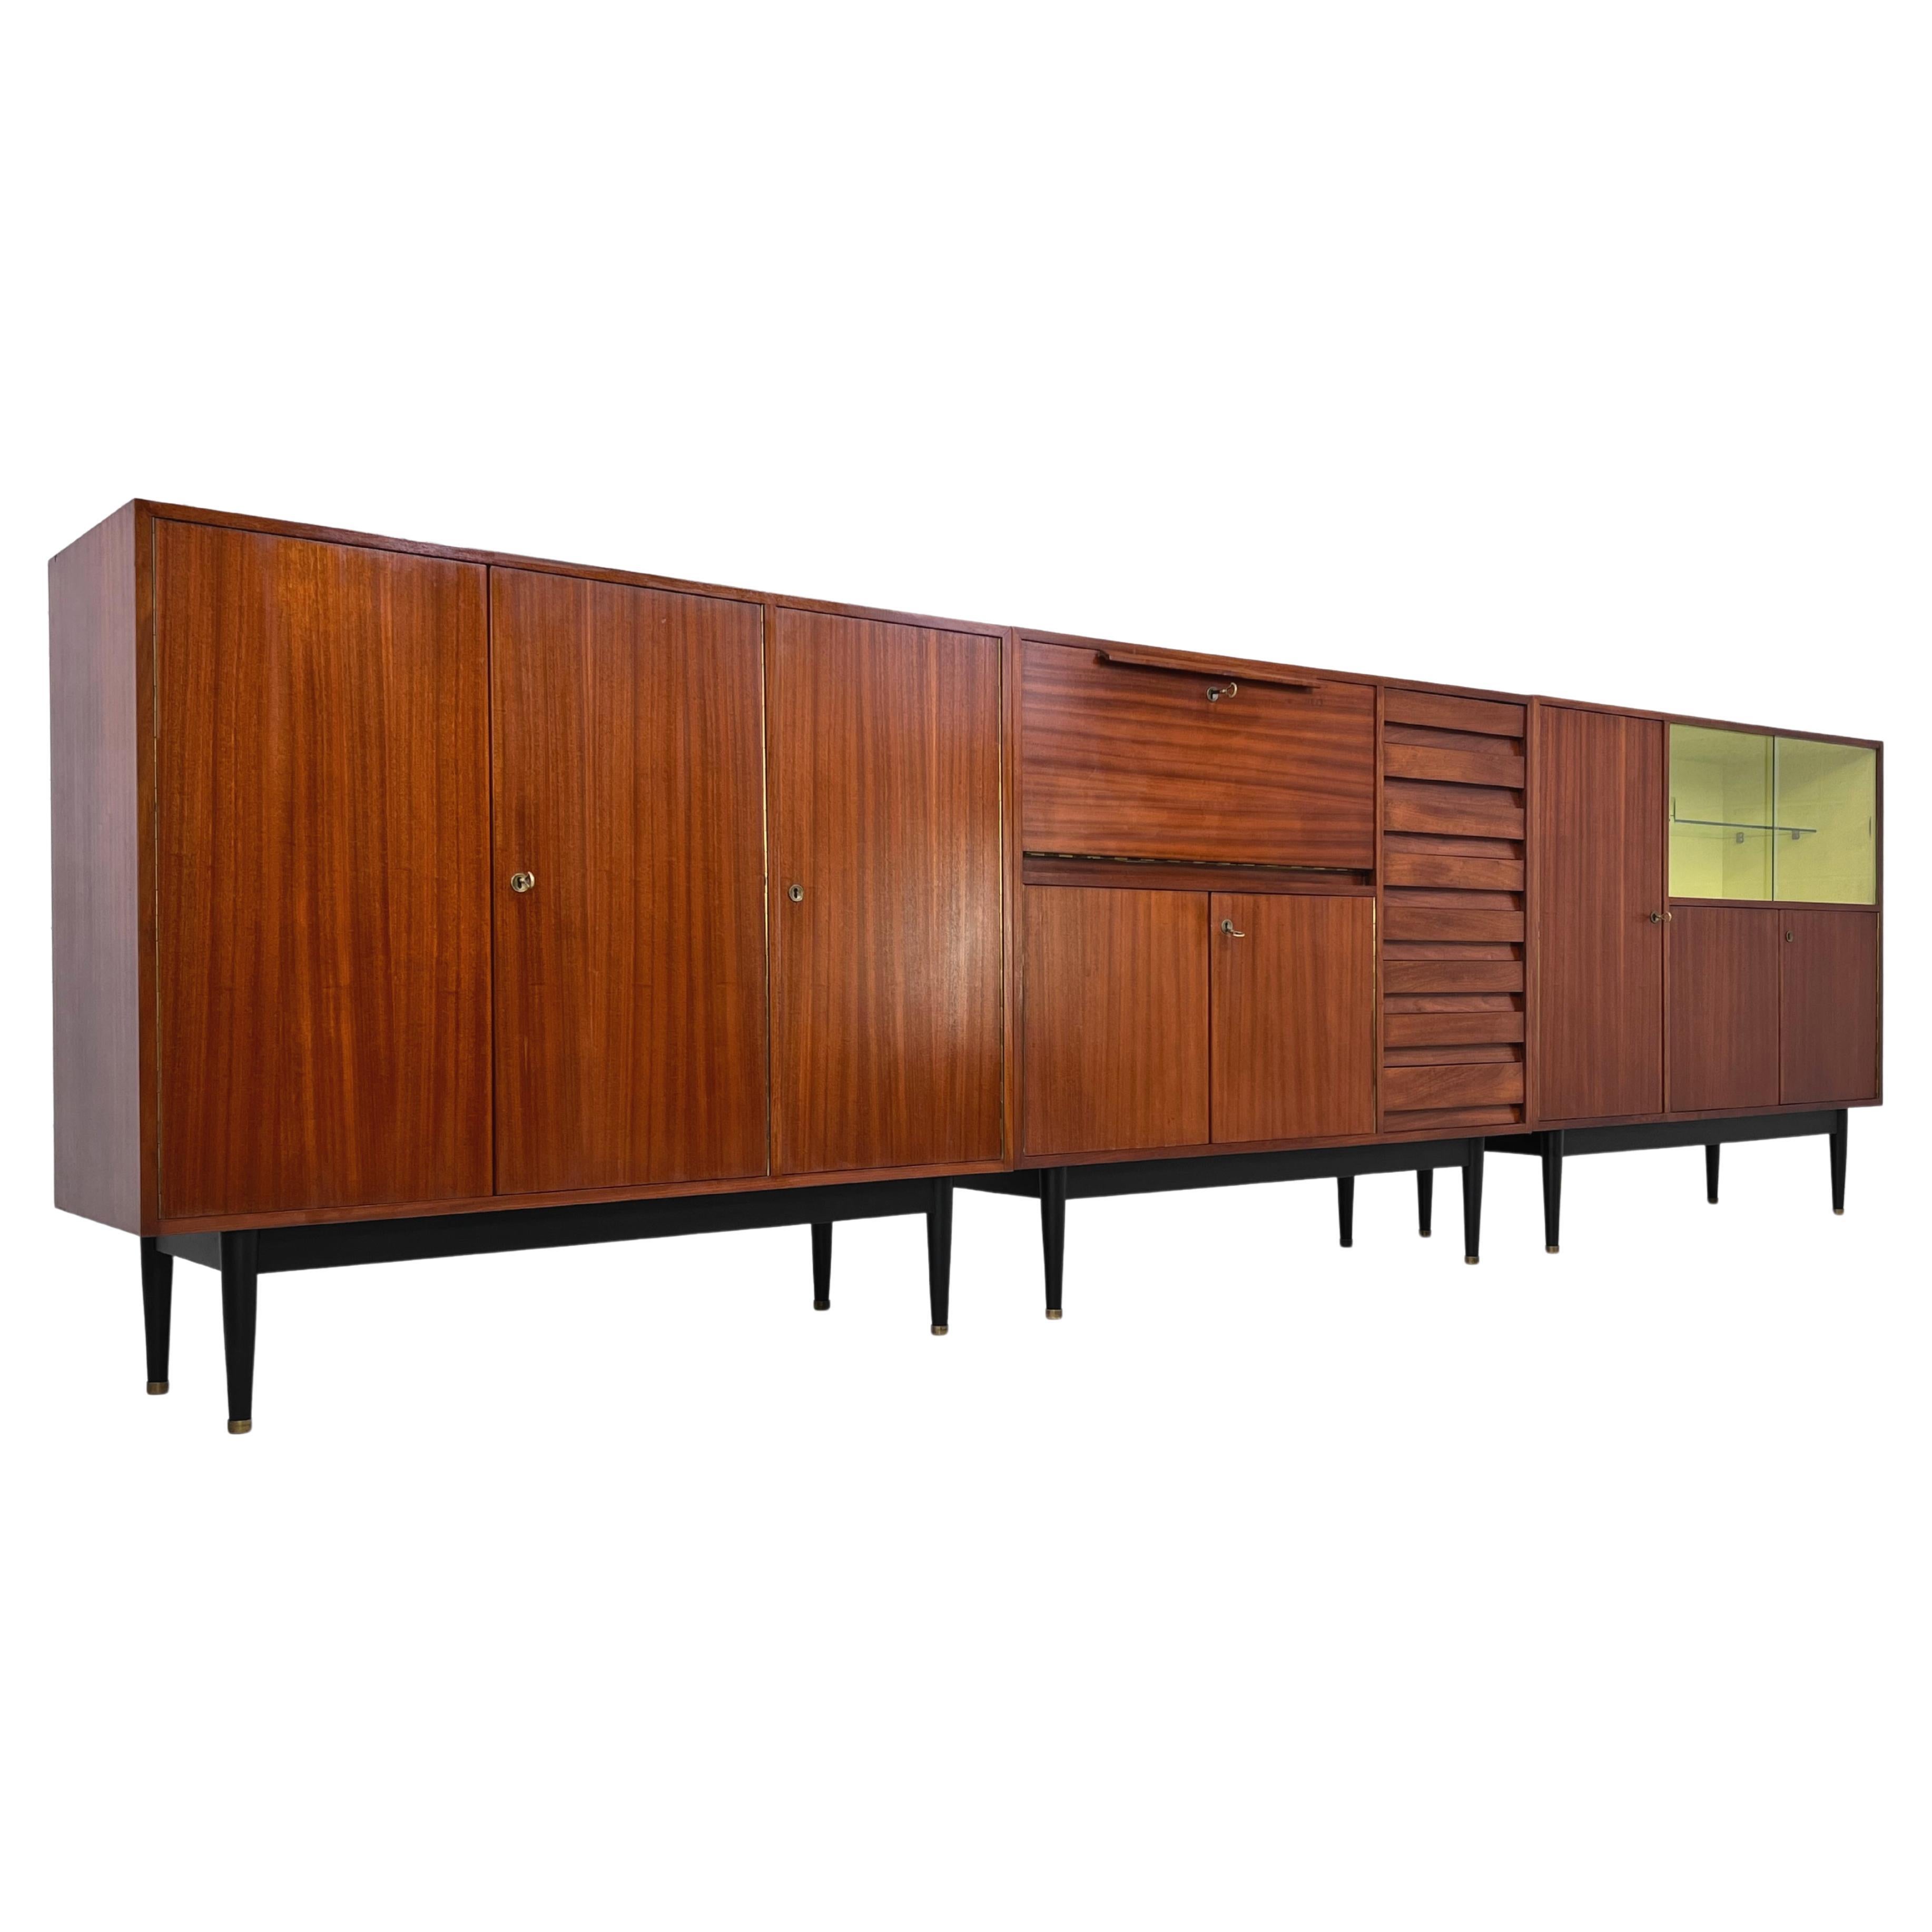 1950s - 1960s Jos De Mey Design Modular Sideboard Or Midboard Cabinets trio Set from 